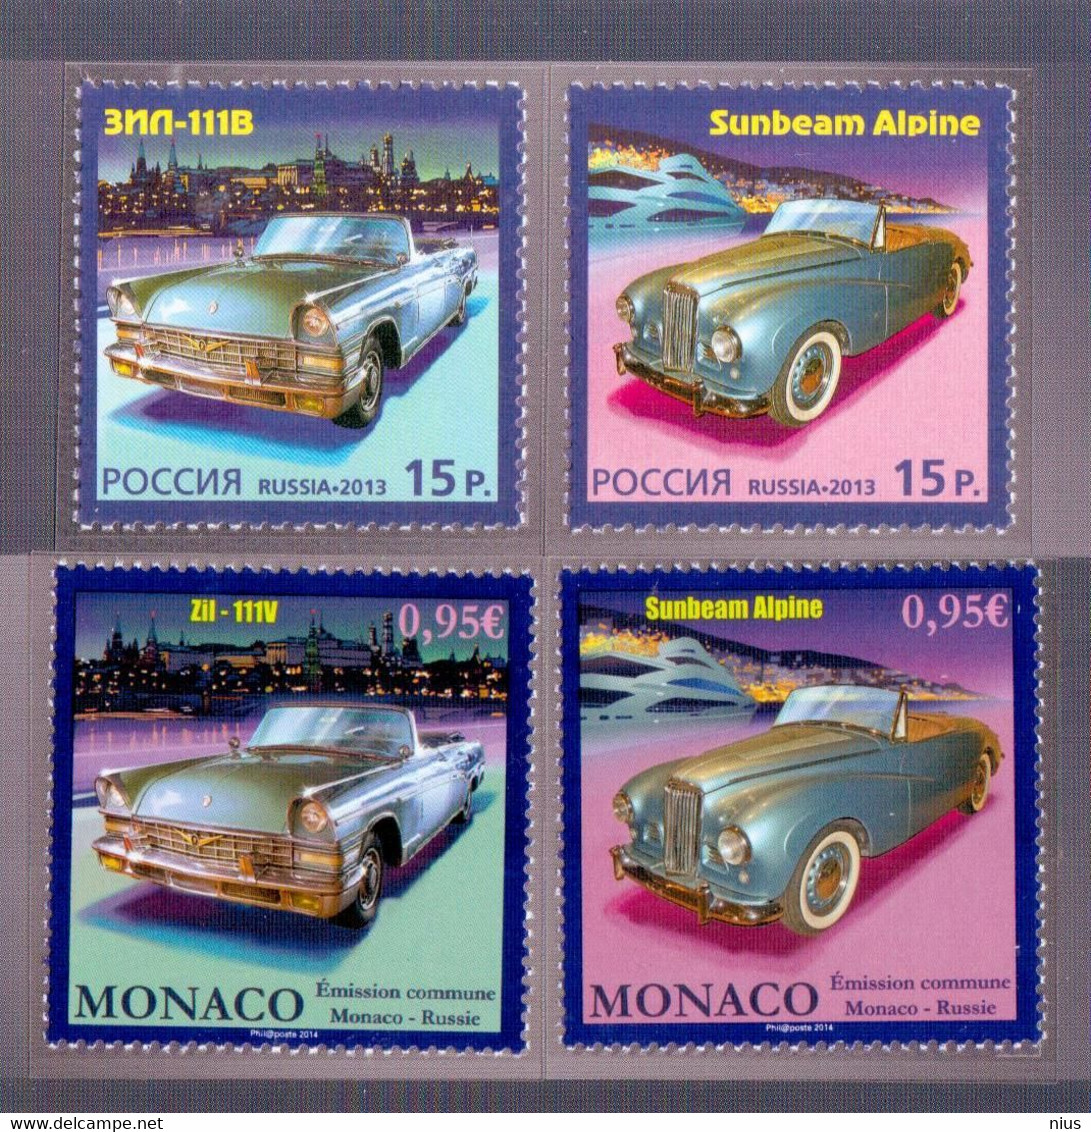 Monaco-Russia 2013 Joint Issue, History Of Motor Industry, Stamps & 3x FDC's - FDC